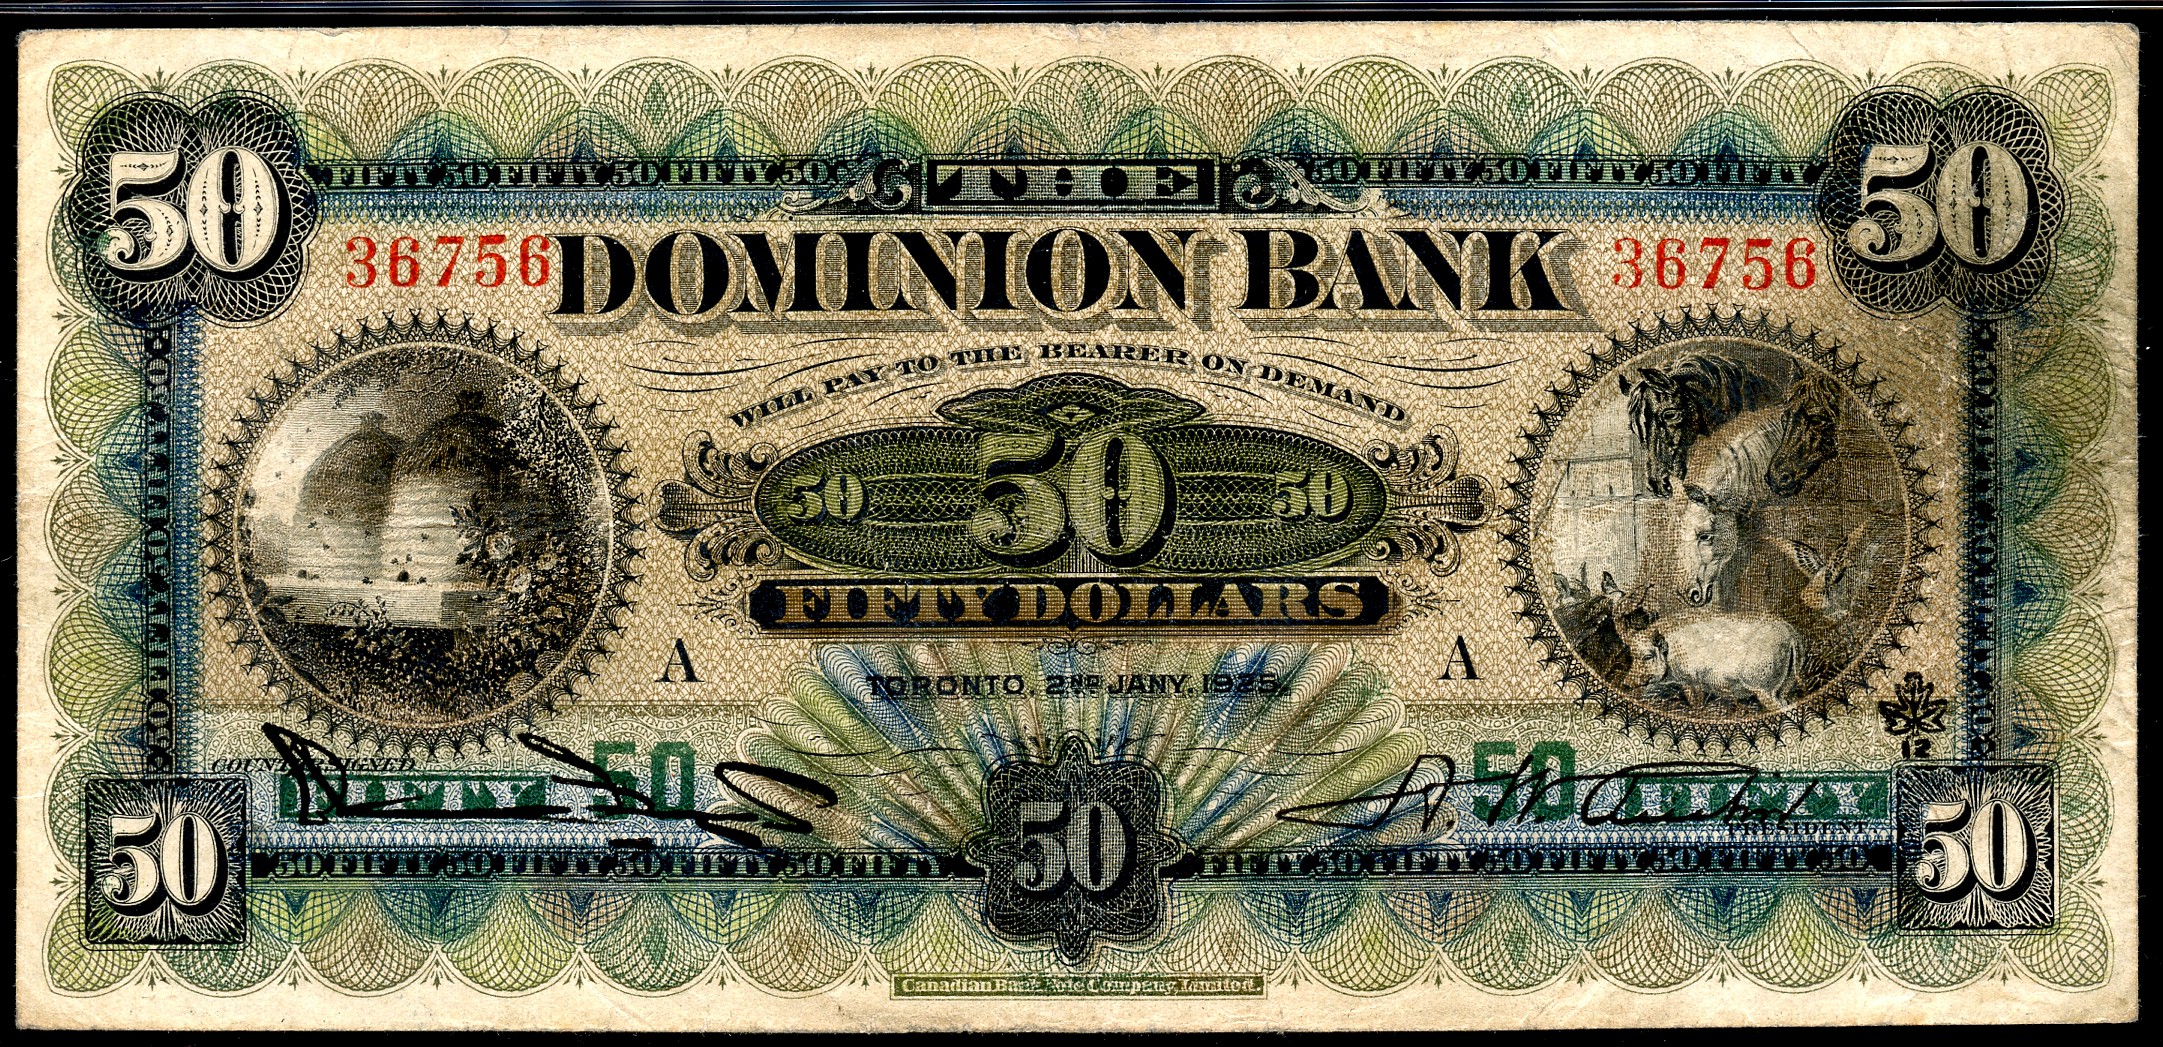 The Dominion Bank; 1925 50 CH2202208 36756, PMG Very Good8